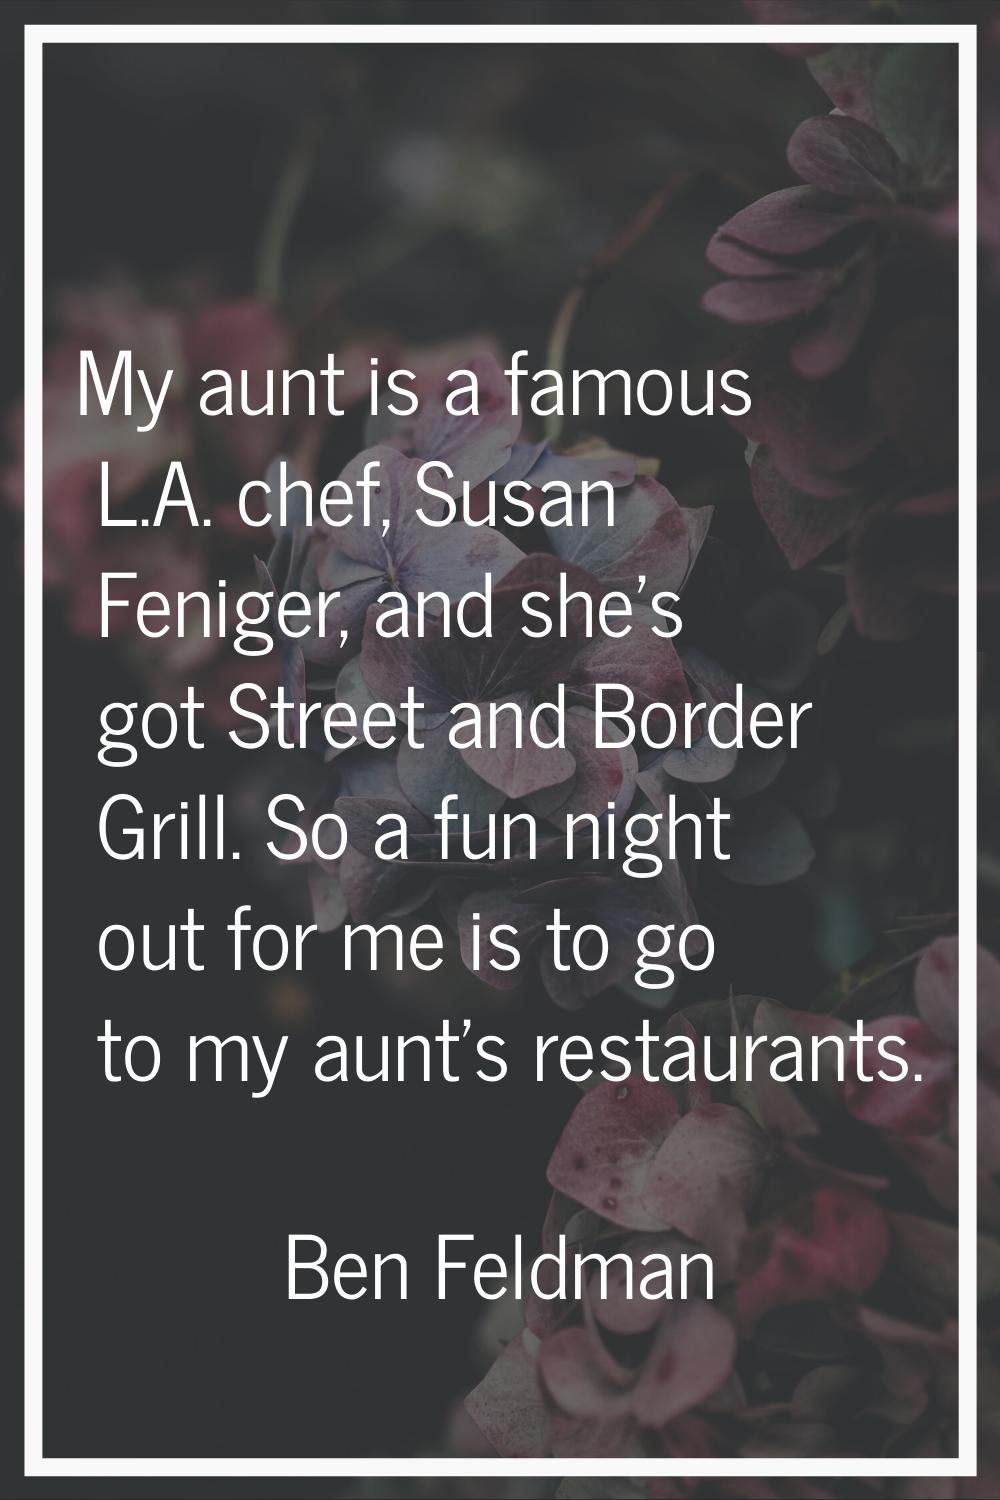 My aunt is a famous L.A. chef, Susan Feniger, and she's got Street and Border Grill. So a fun night